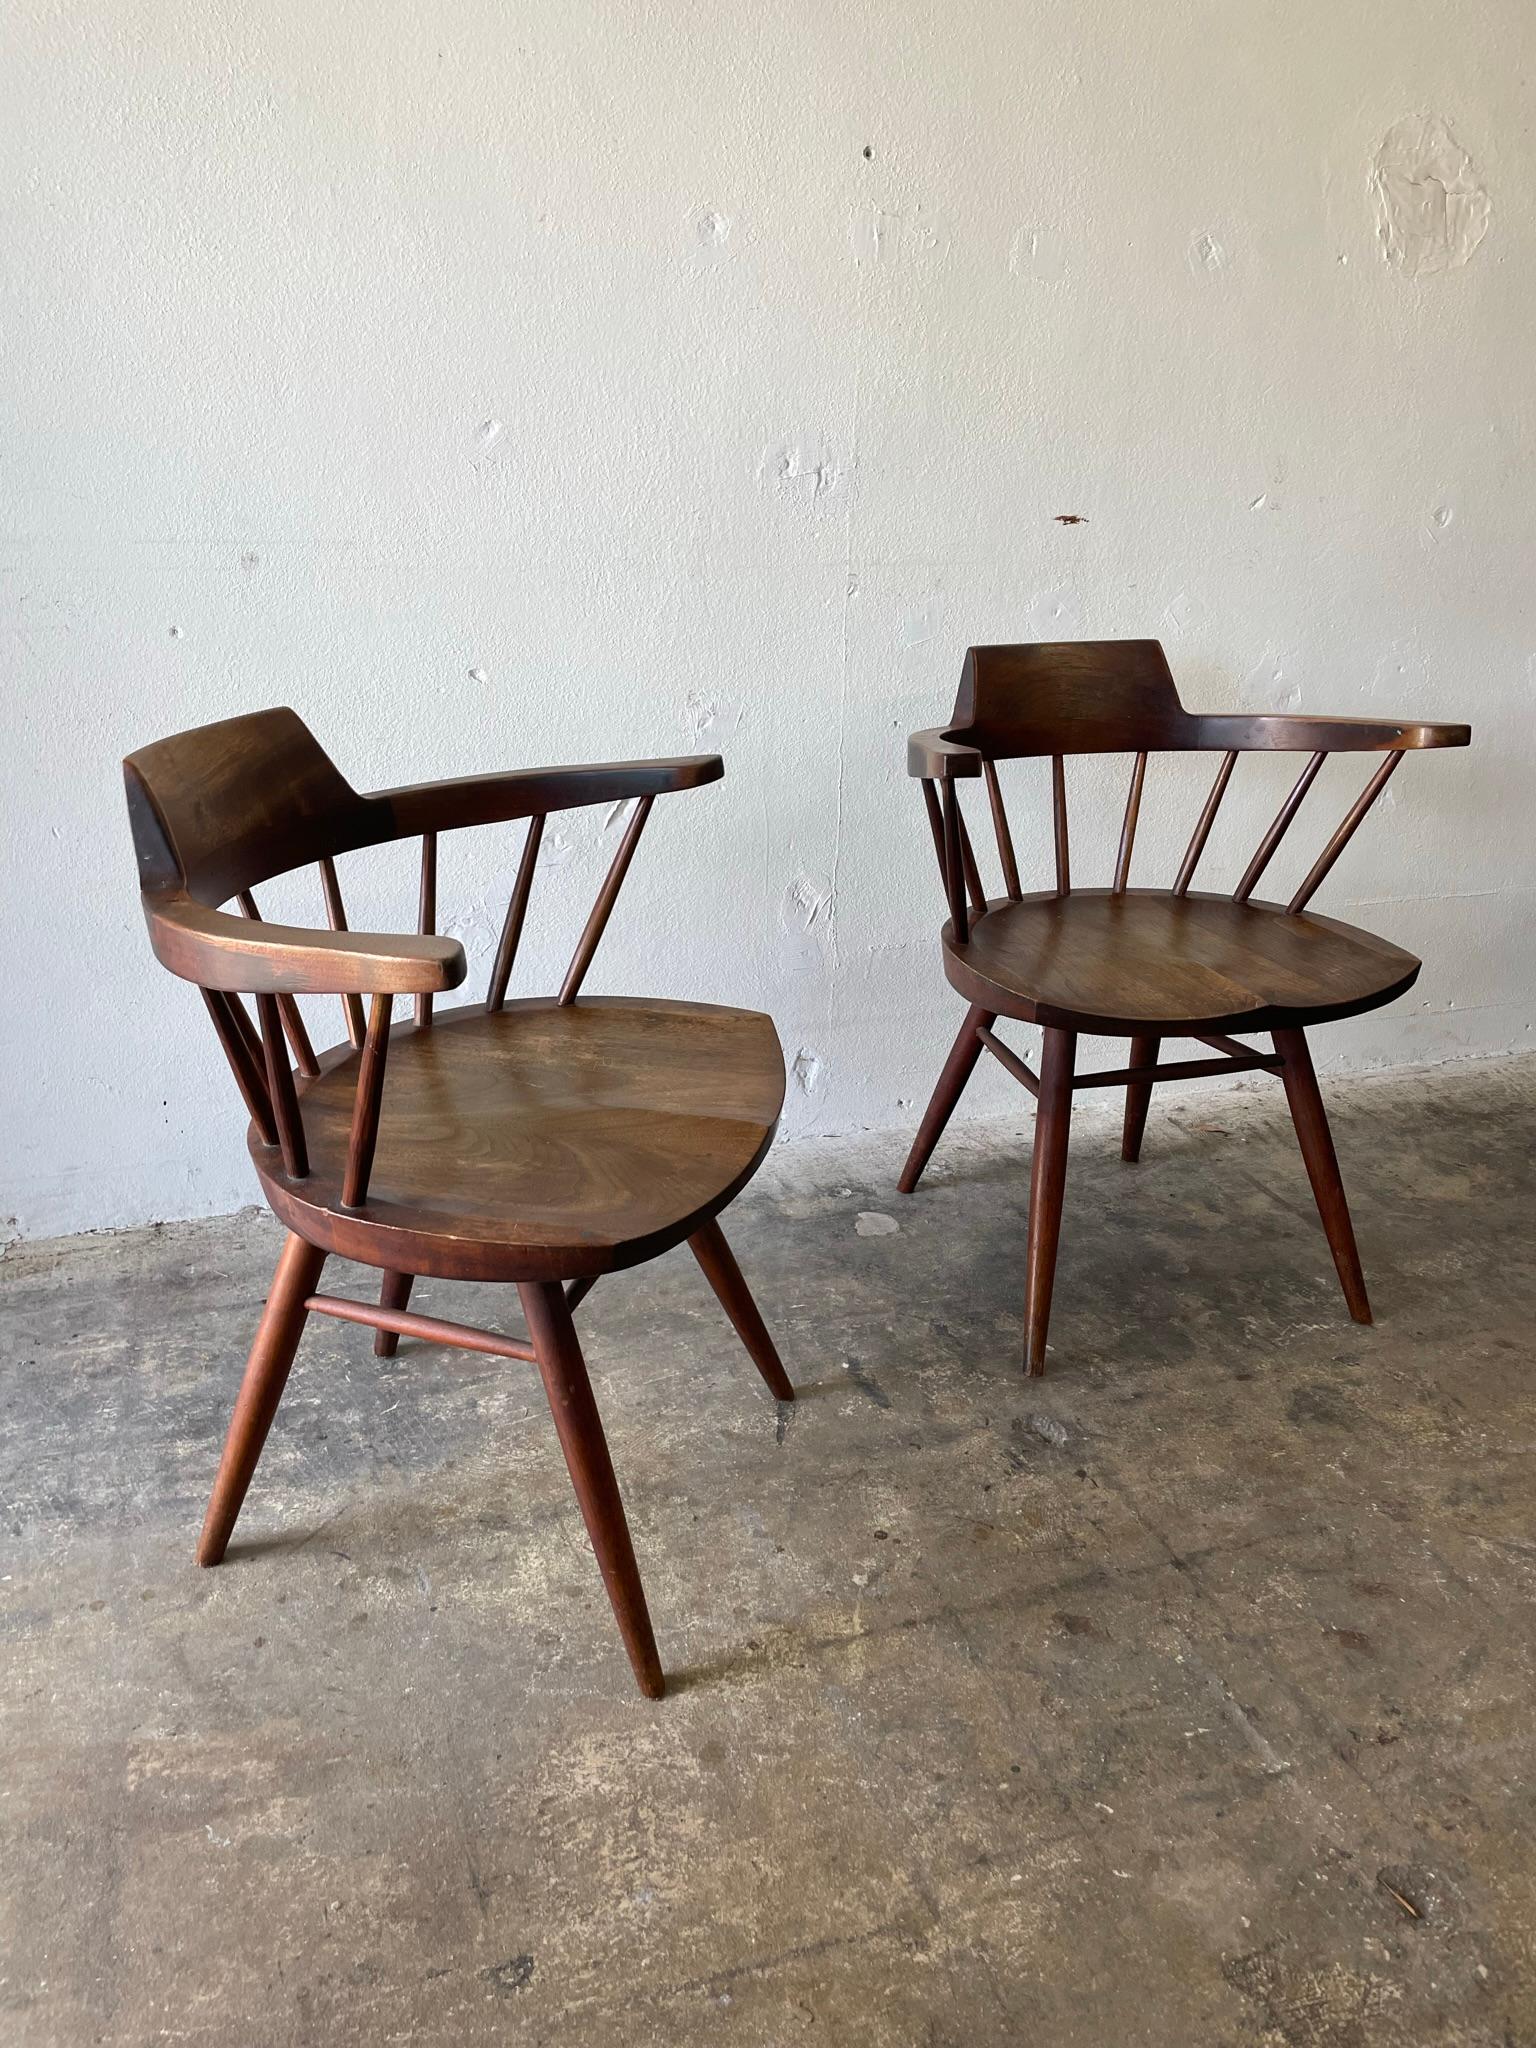 Pair of authentic George Nakashima Captain’s chairs. Walnut. Hand carved seat and spindles. Comes with authenticity receipt from George Nakashima Woodworkers. Originally purchased by a Columbia Records executive in 1960. Original condition, wear and